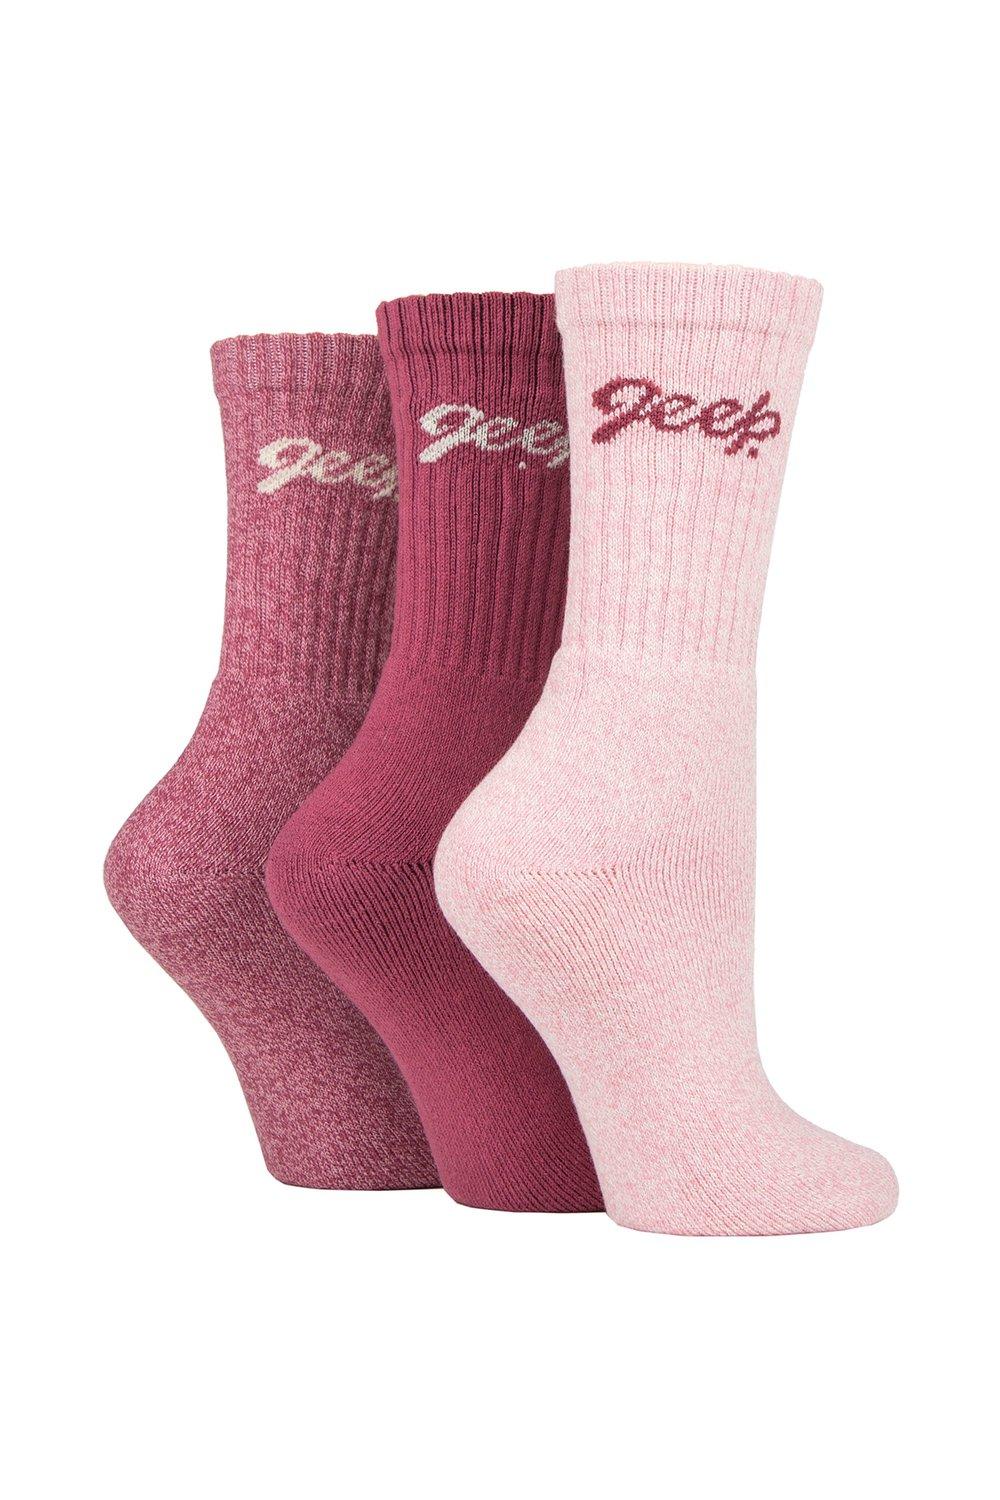 3 Pair Cushioned Foot Cotton Boot Socks